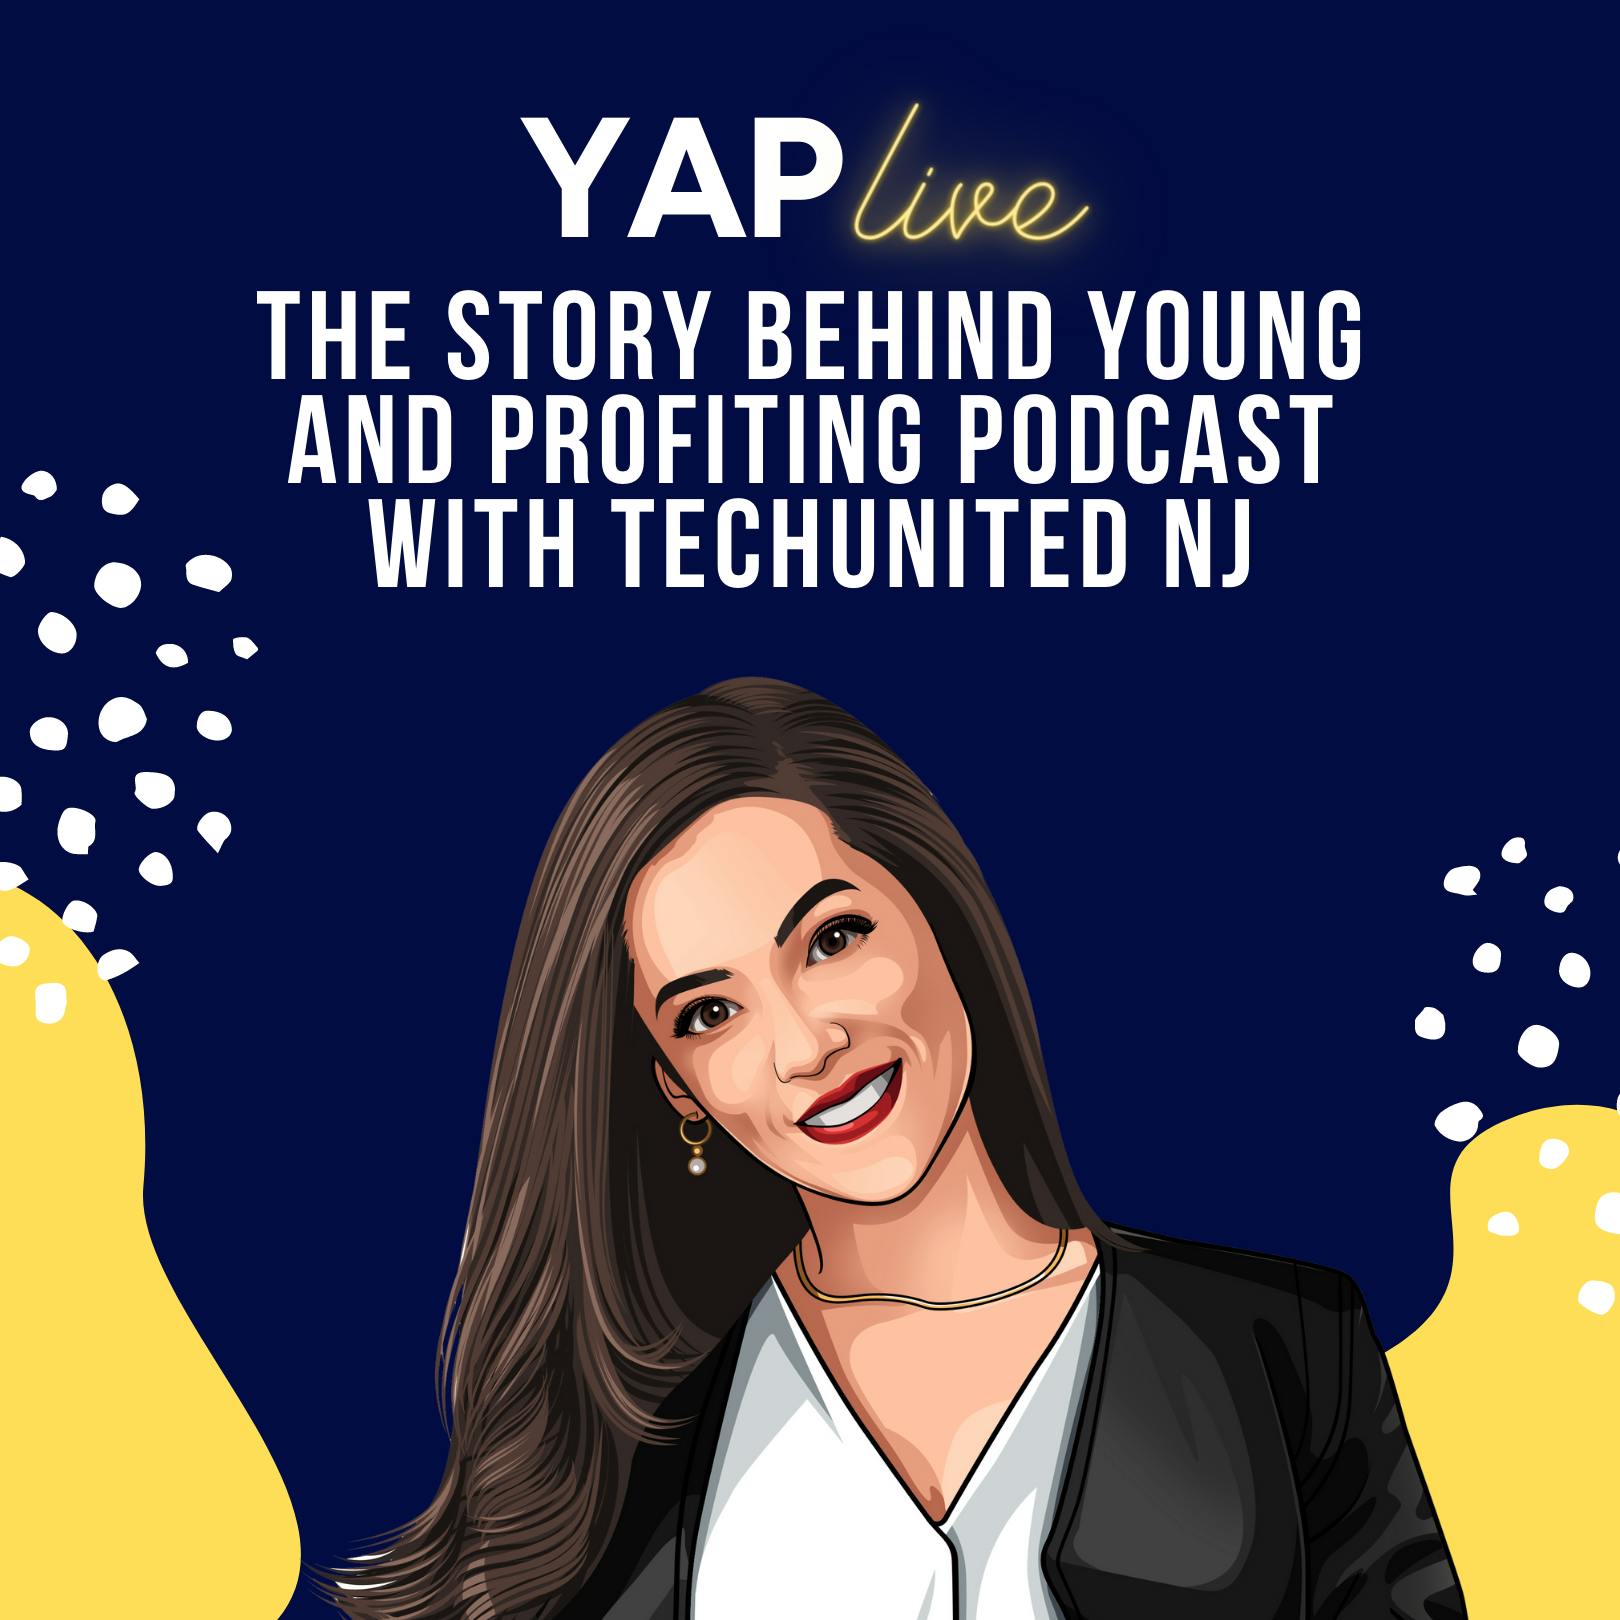 YAPLive: The Story Behind Young and Profiting Podcast with TechUnited NJ | Uncut Version by Hala Taha | YAP Media Network